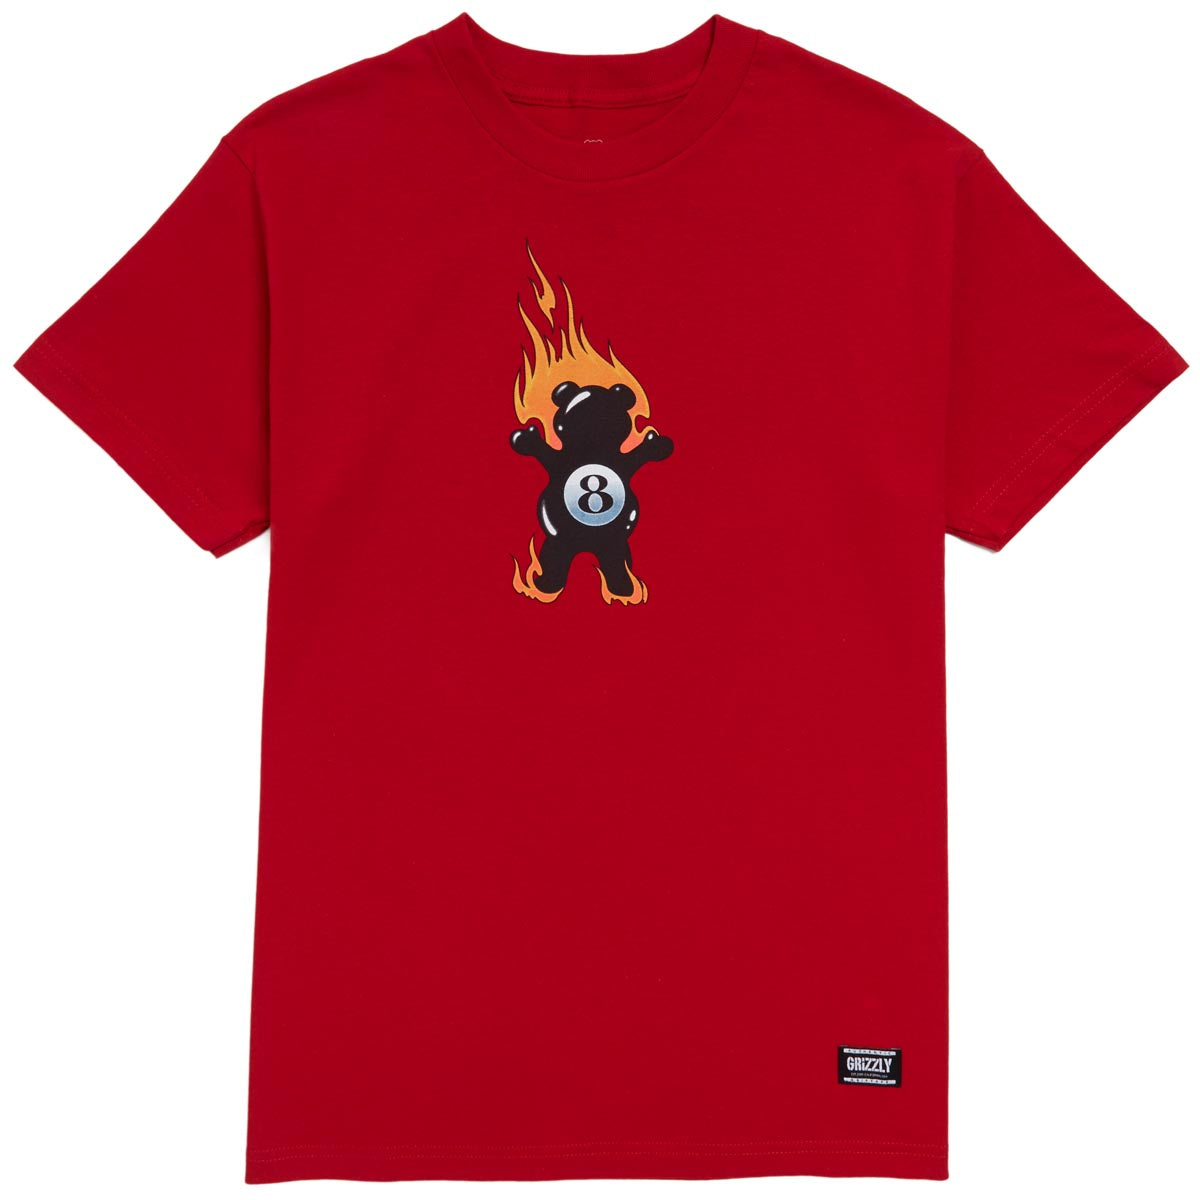 Grizzly Behind The 8Ball T-Shirt - Red image 1